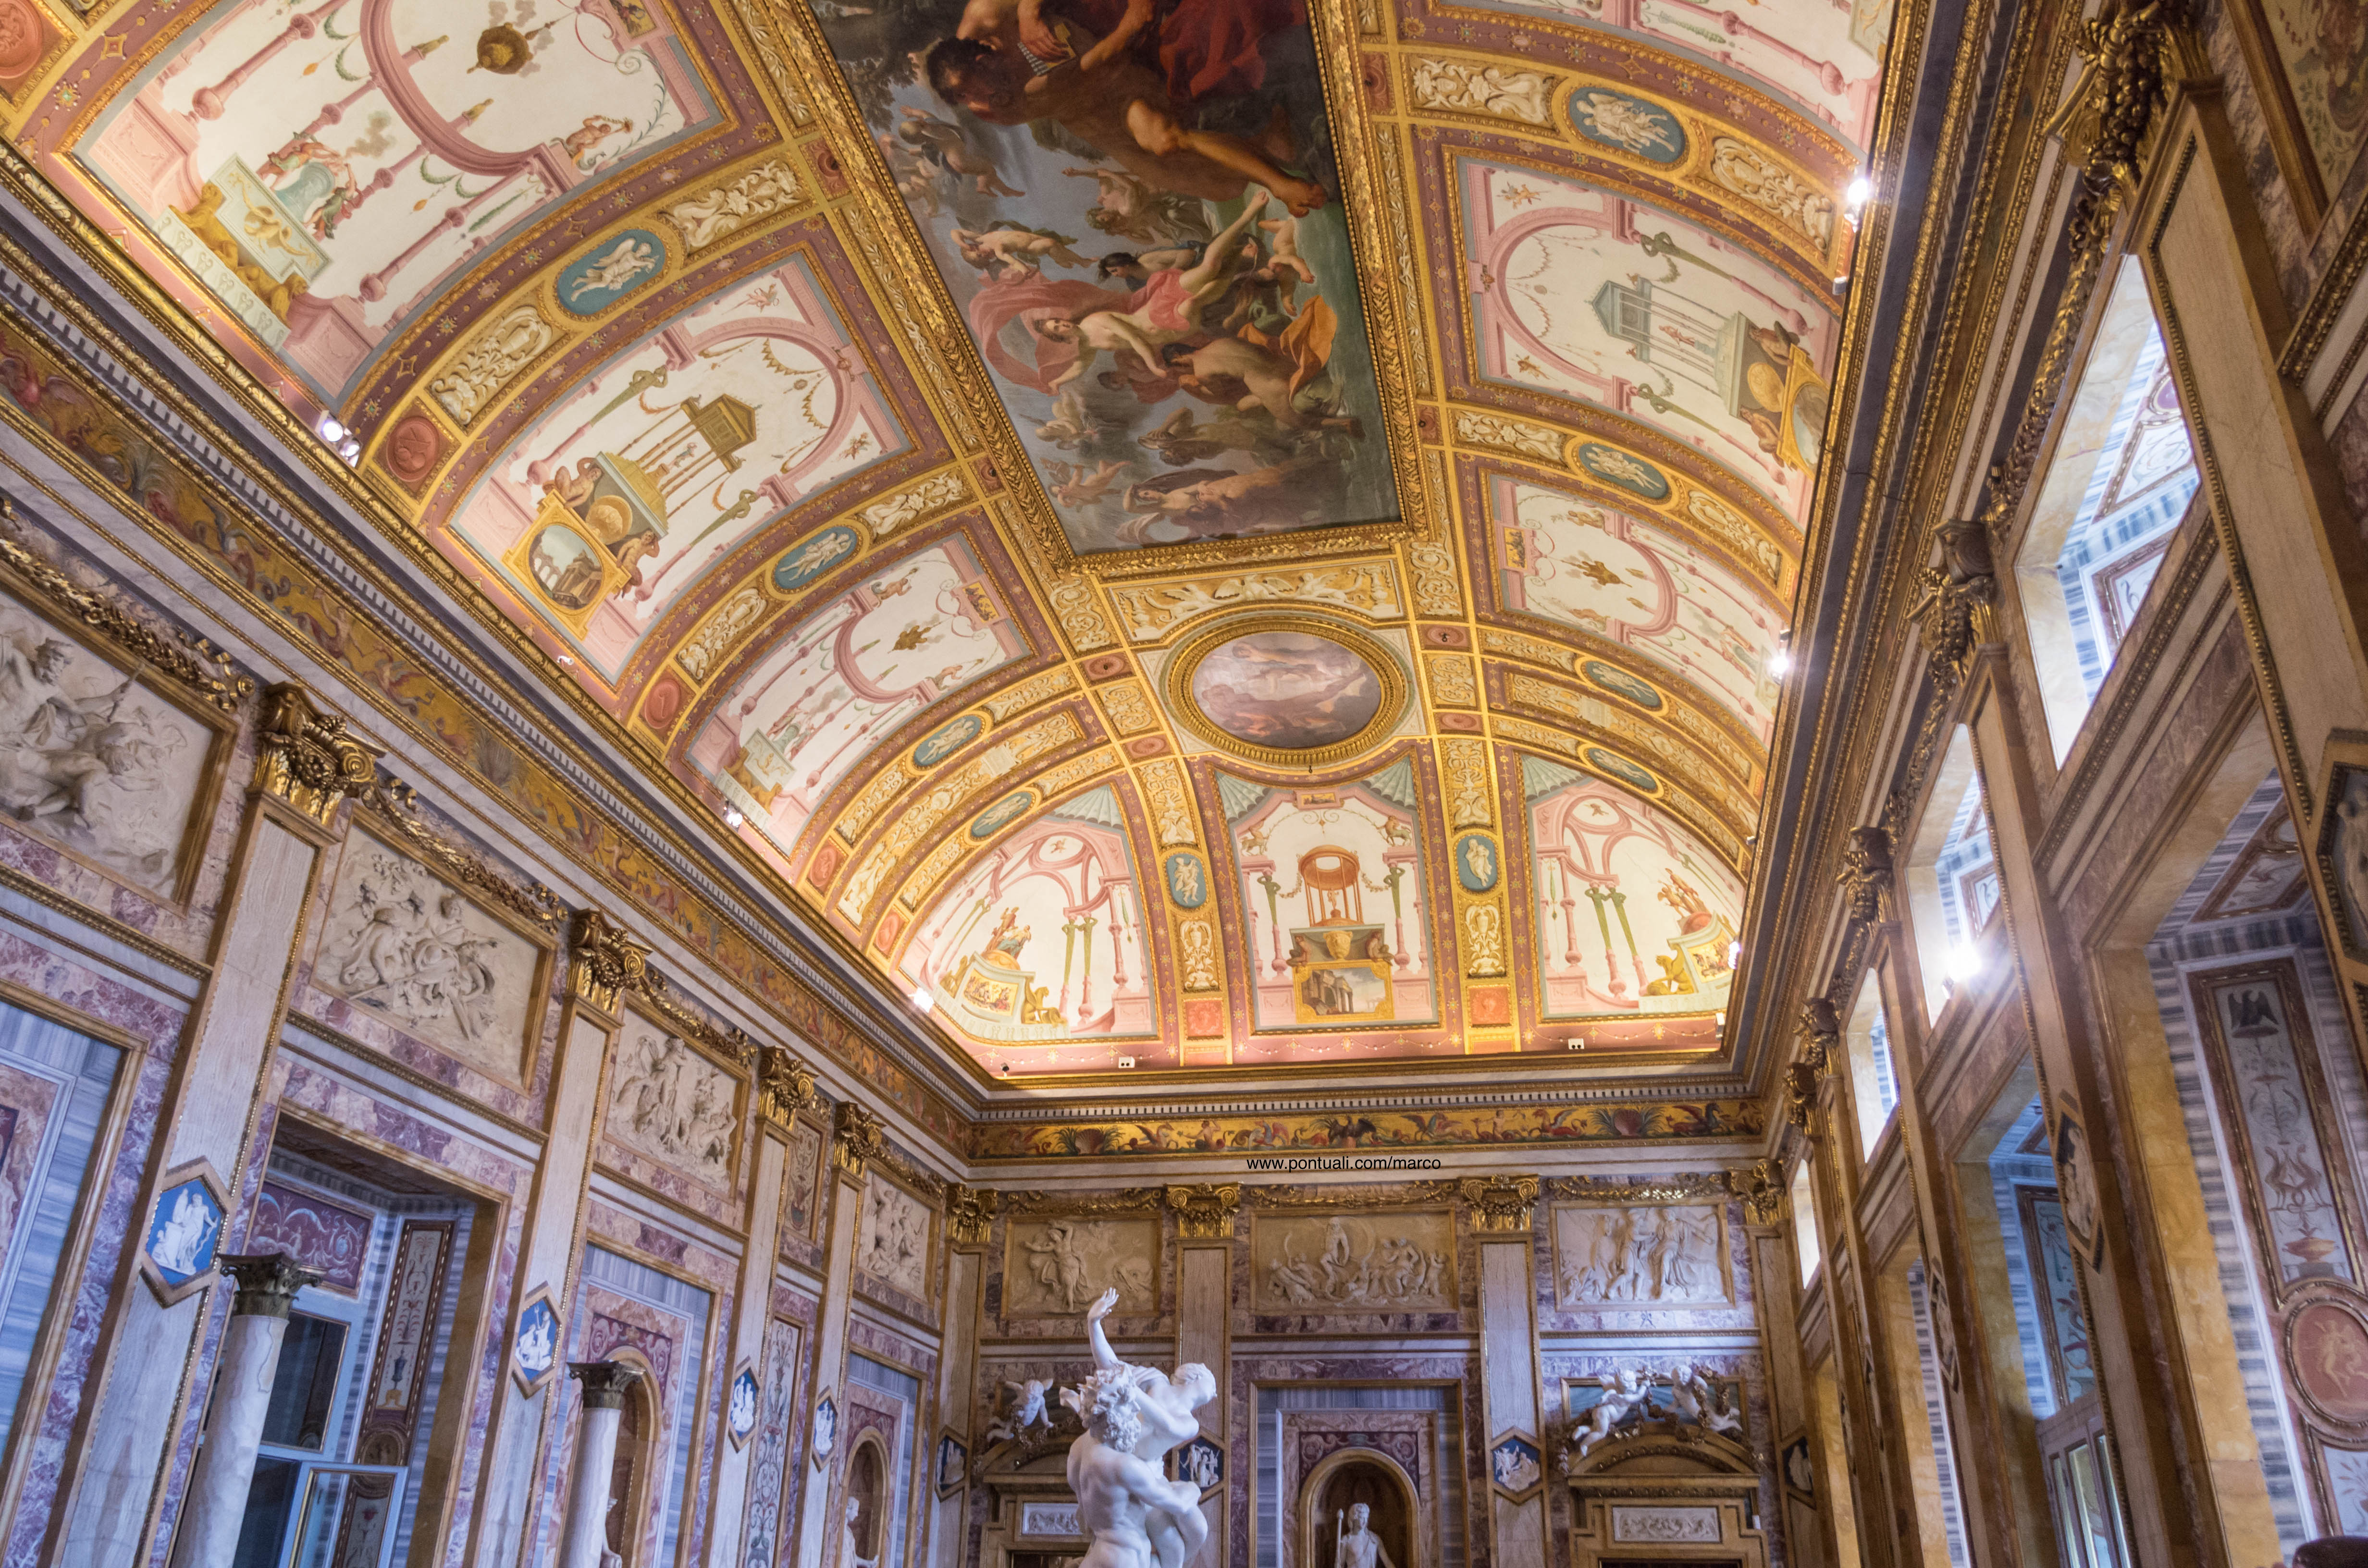 Borghese Art Gallery and Gardens